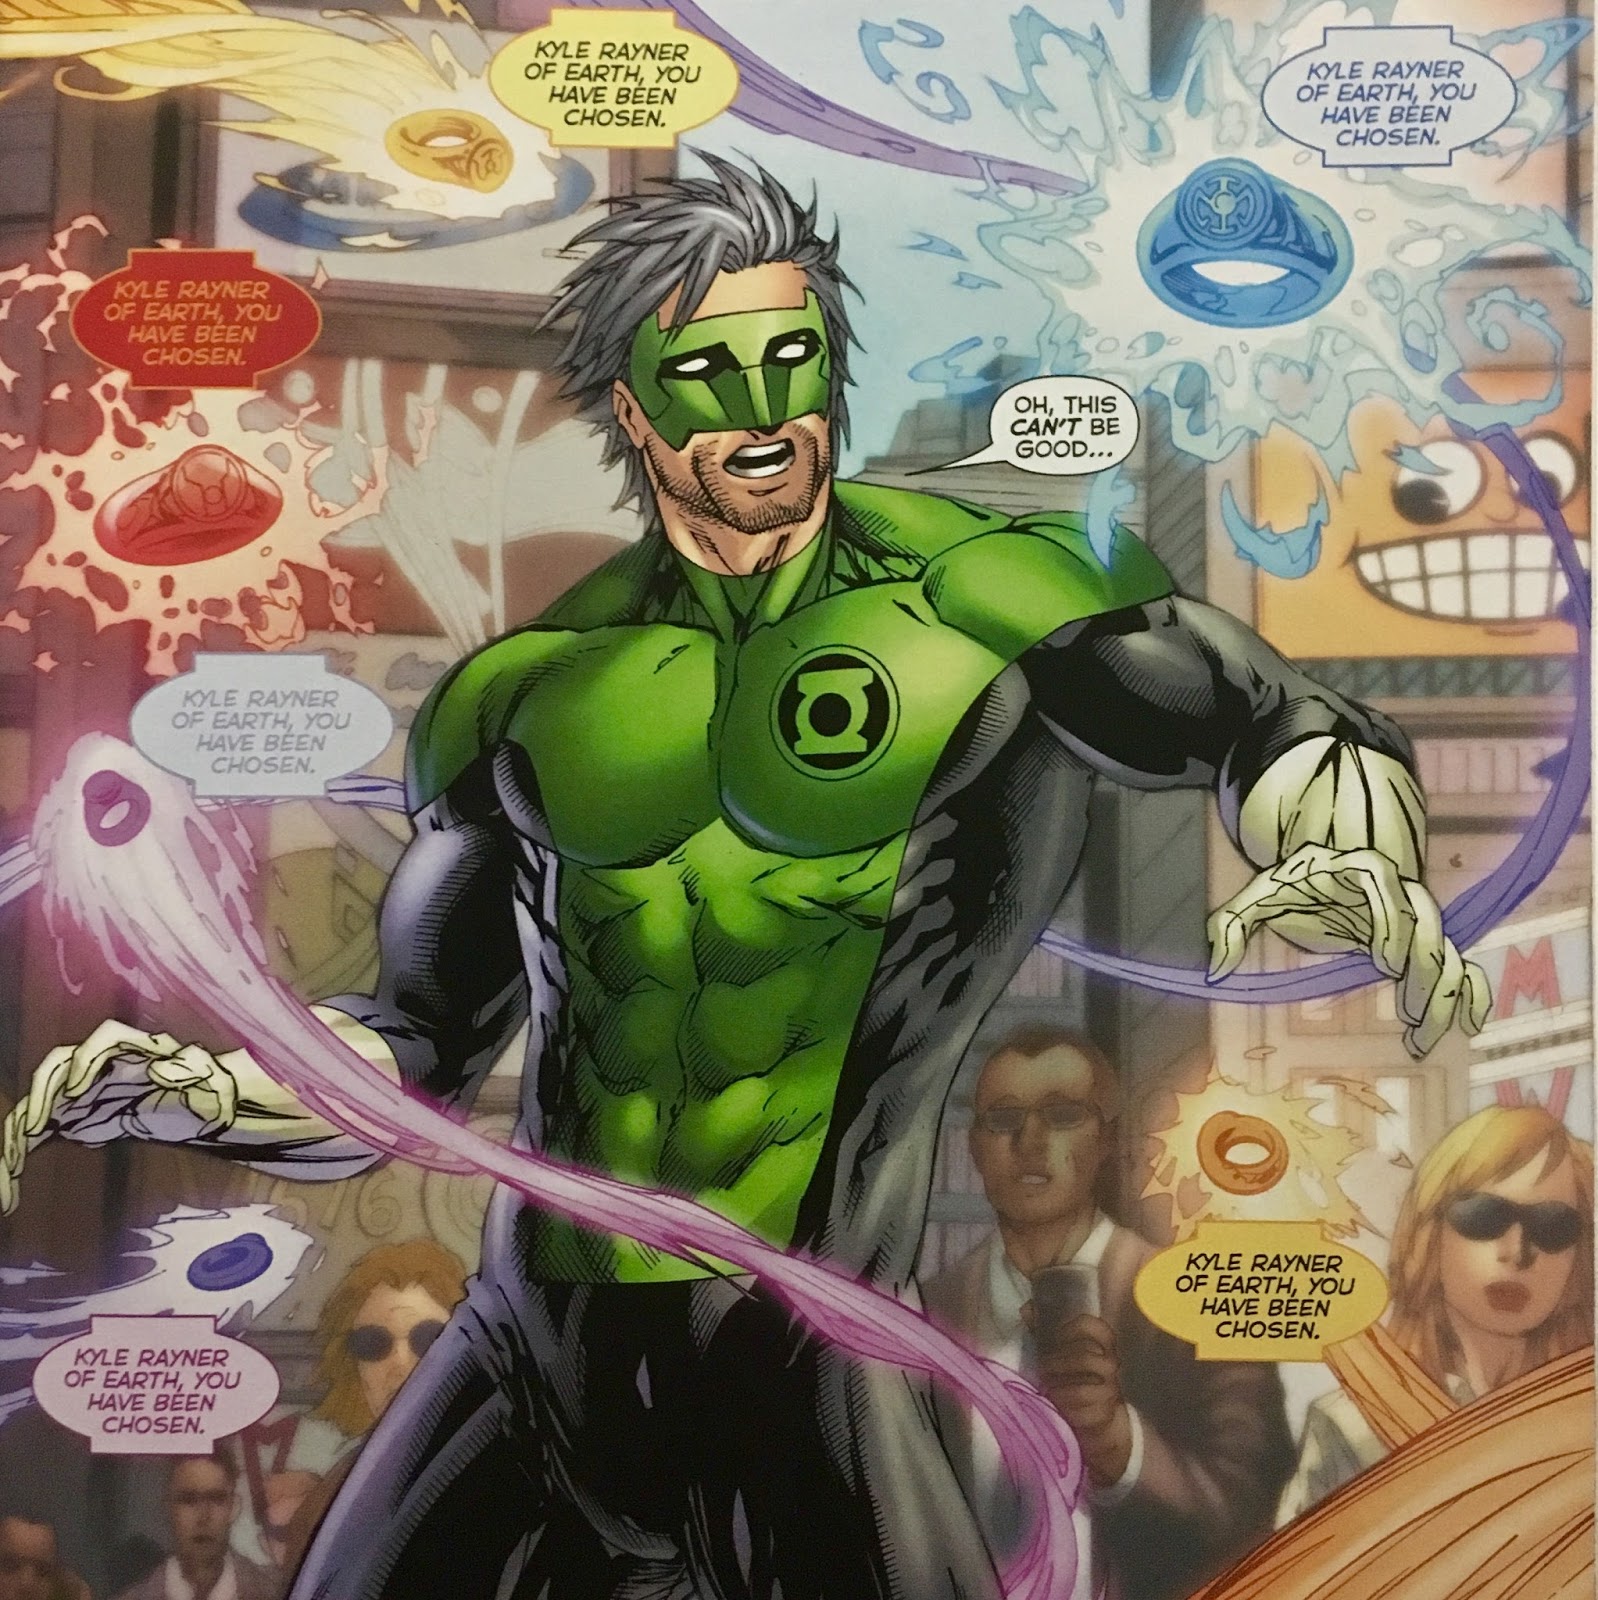 Comic Book Brawl - Kyle Rayner |Full Spectrum| VS Loki |w/ Infinity Stones|  Location: Justice League Satellite Stipulation: Random Encounter • In  Character • No Outside Interference • No BFR • Win